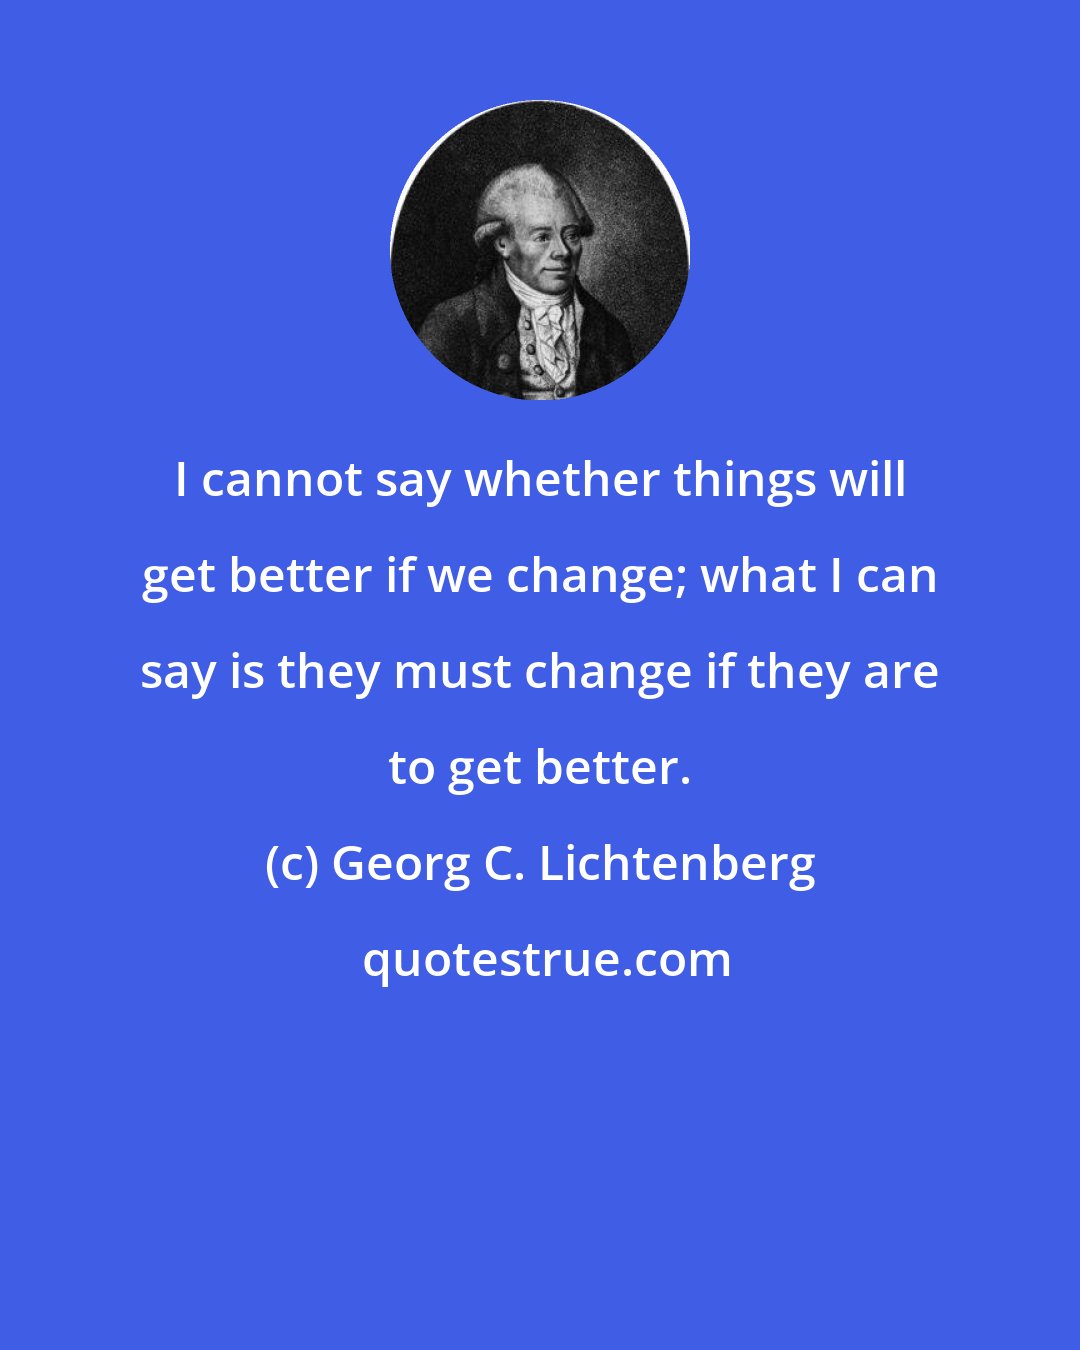 Georg C. Lichtenberg: I cannot say whether things will get better if we change; what I can say is they must change if they are to get better.